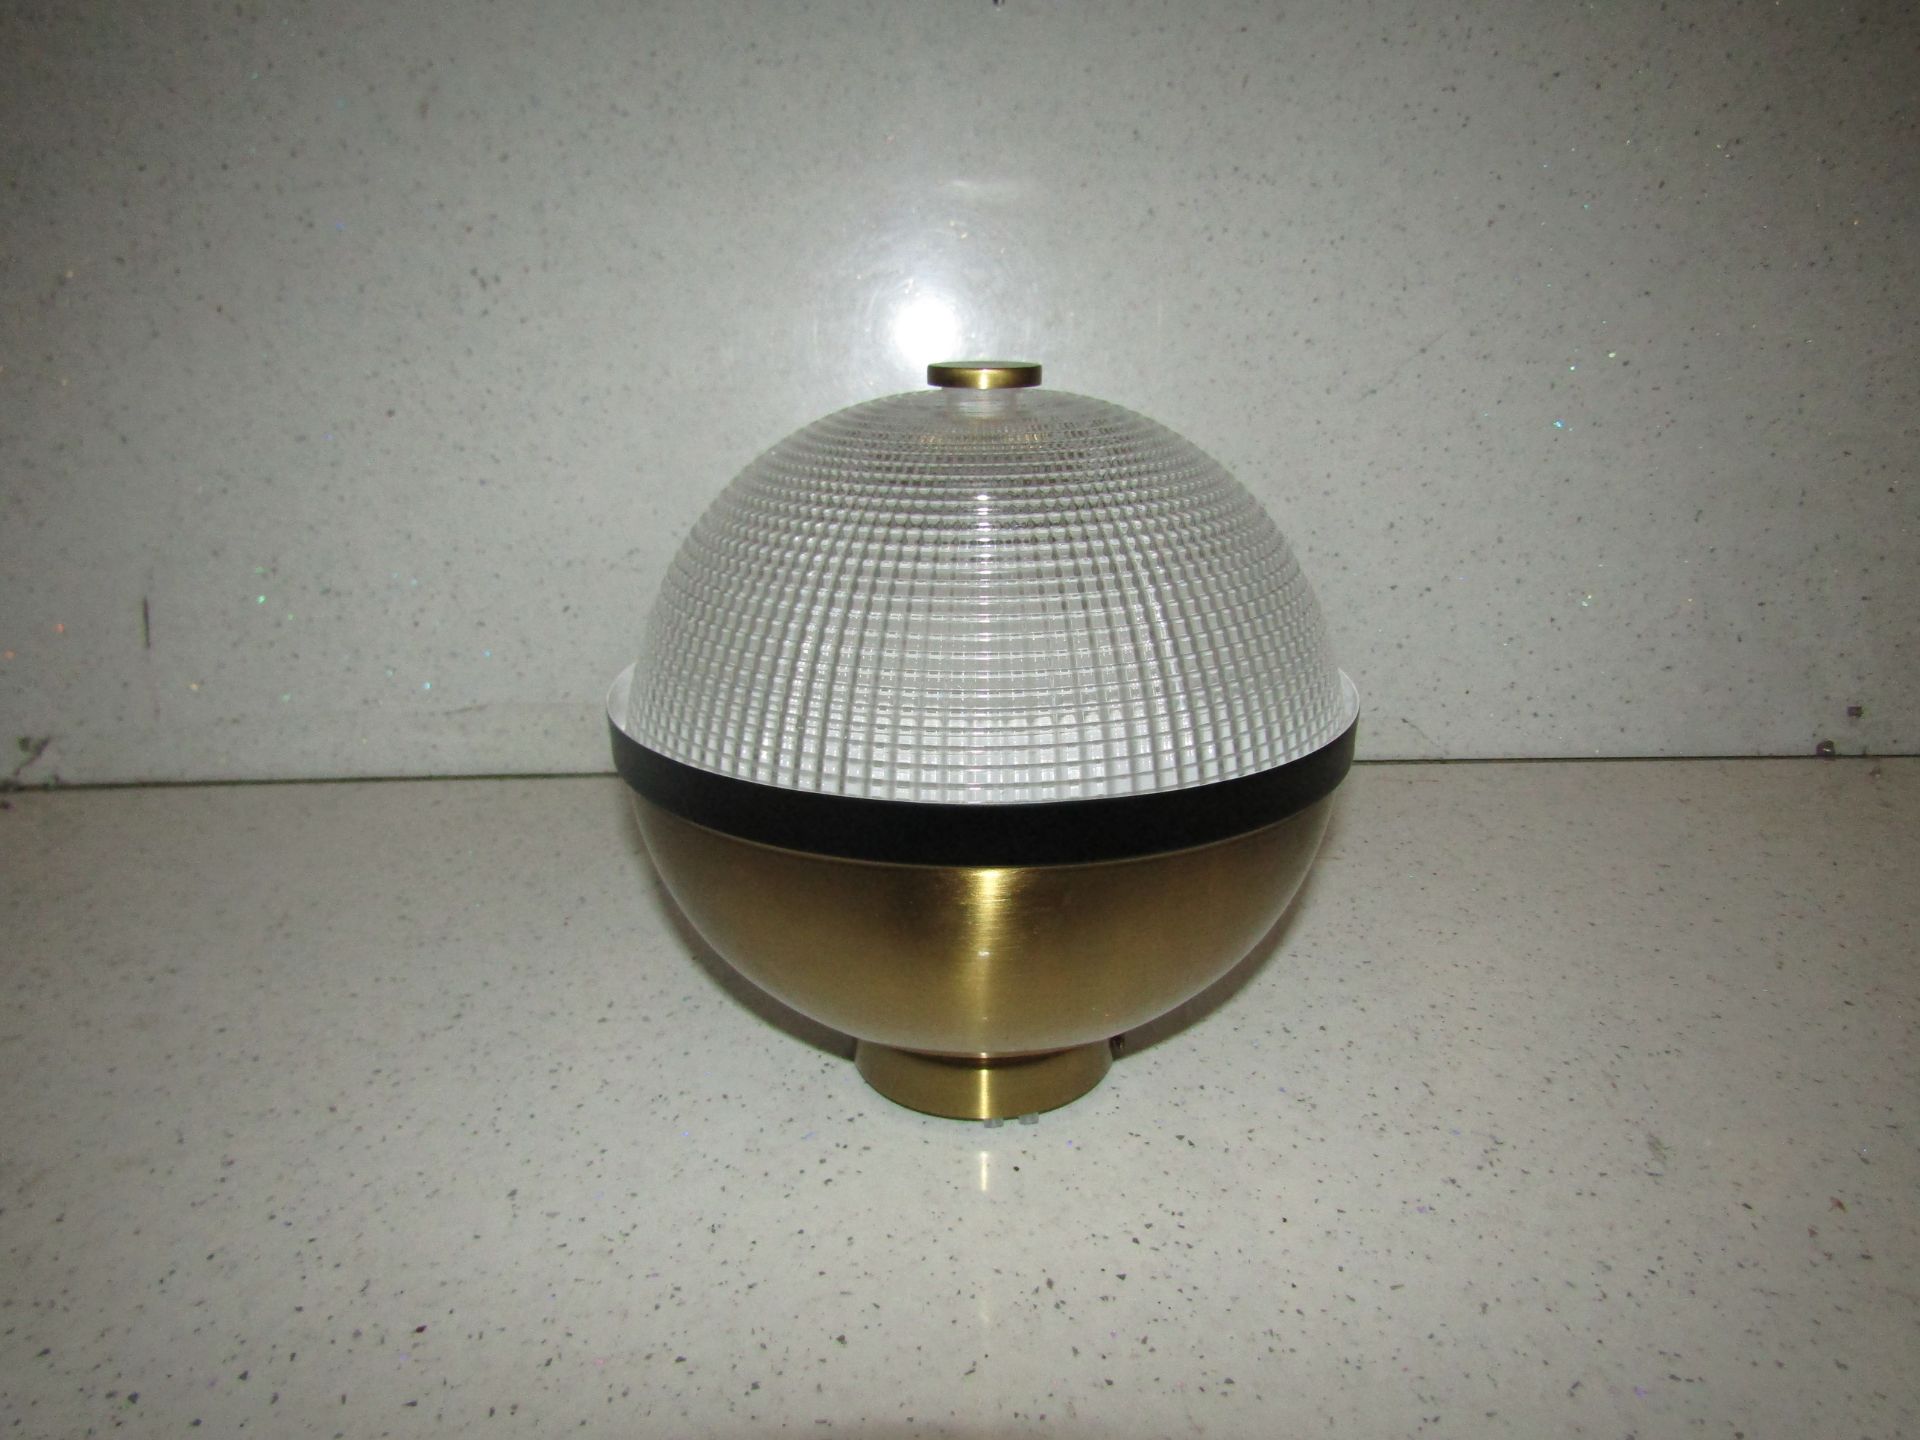 Chelsom - Brass & Textured Glass Ceiling Light - DI/36/W1 - New & Boxed.